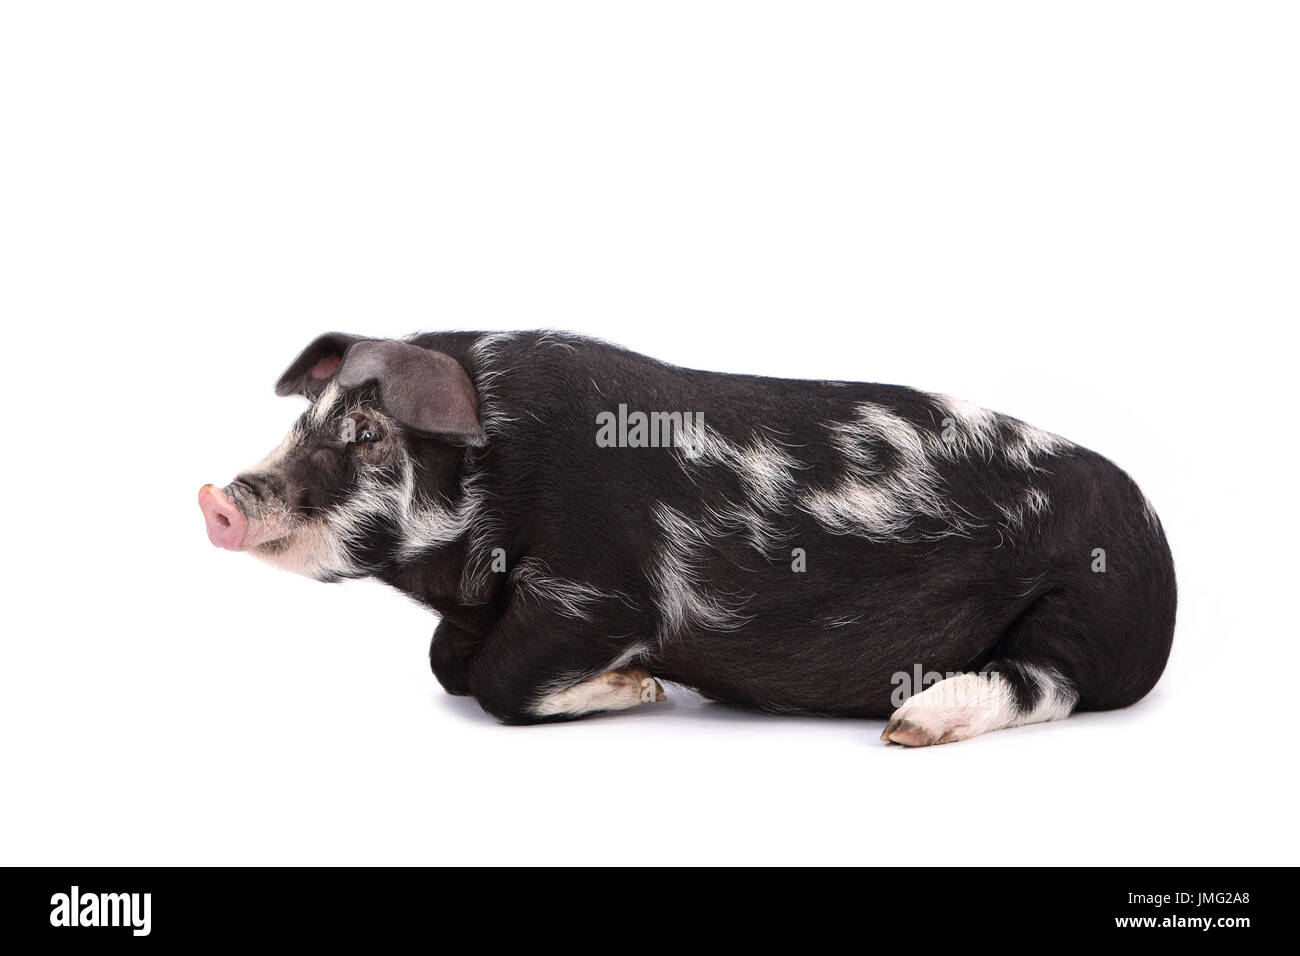 Turopolje Pig. Piglet lying. Studio picture against a white background. Germany Stock Photo